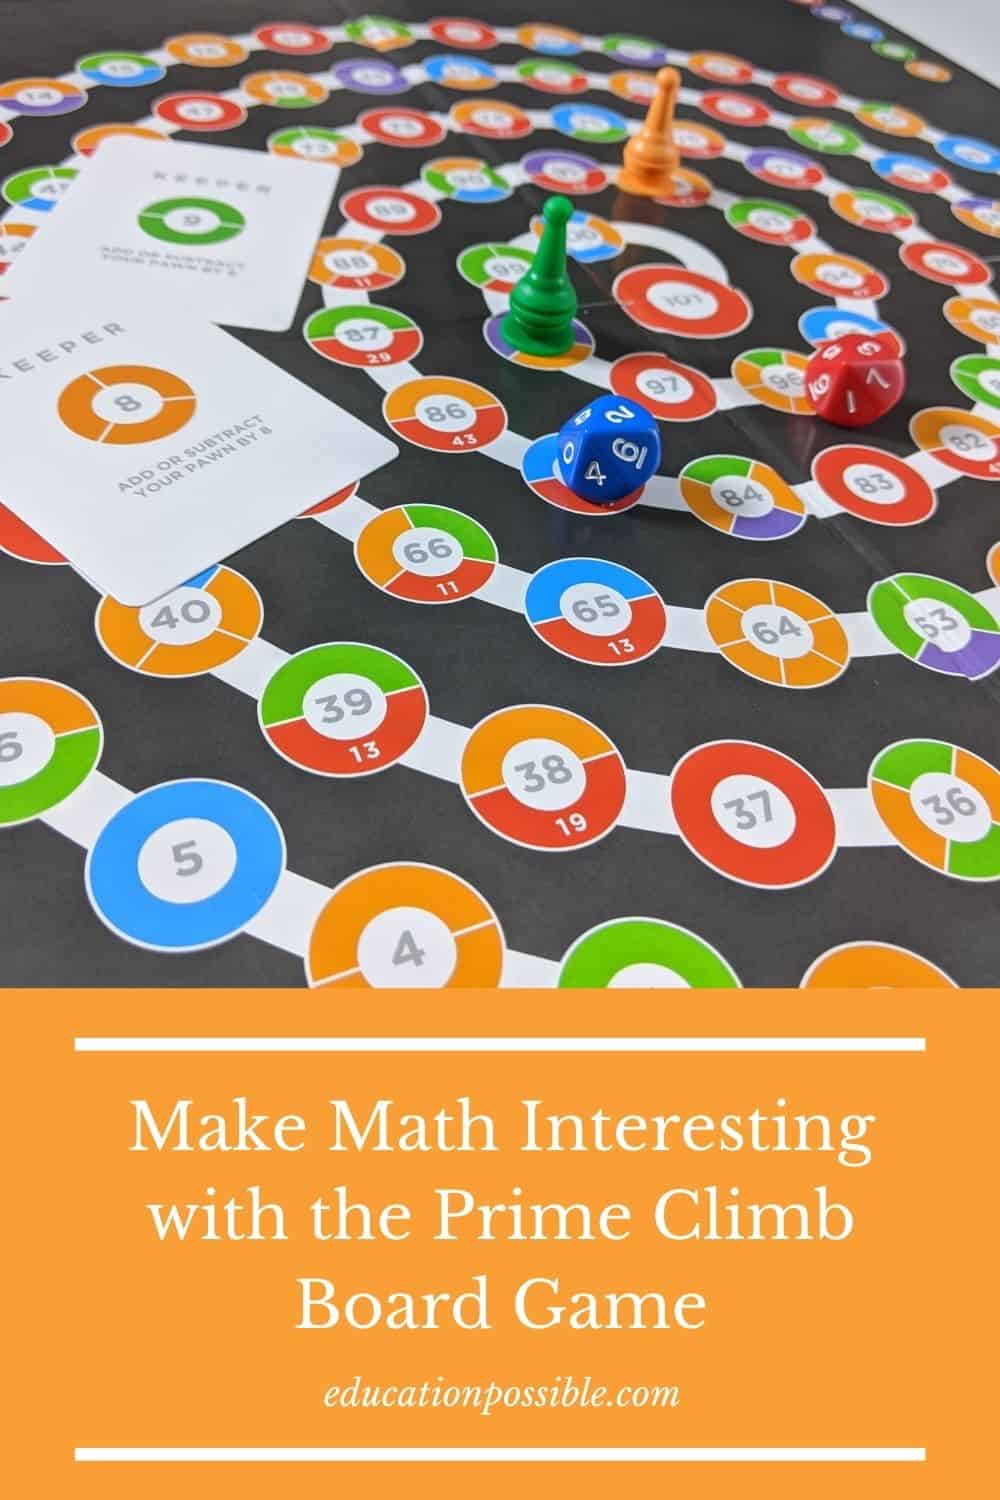 Make Math Interesting with the Prime Climb Board Game